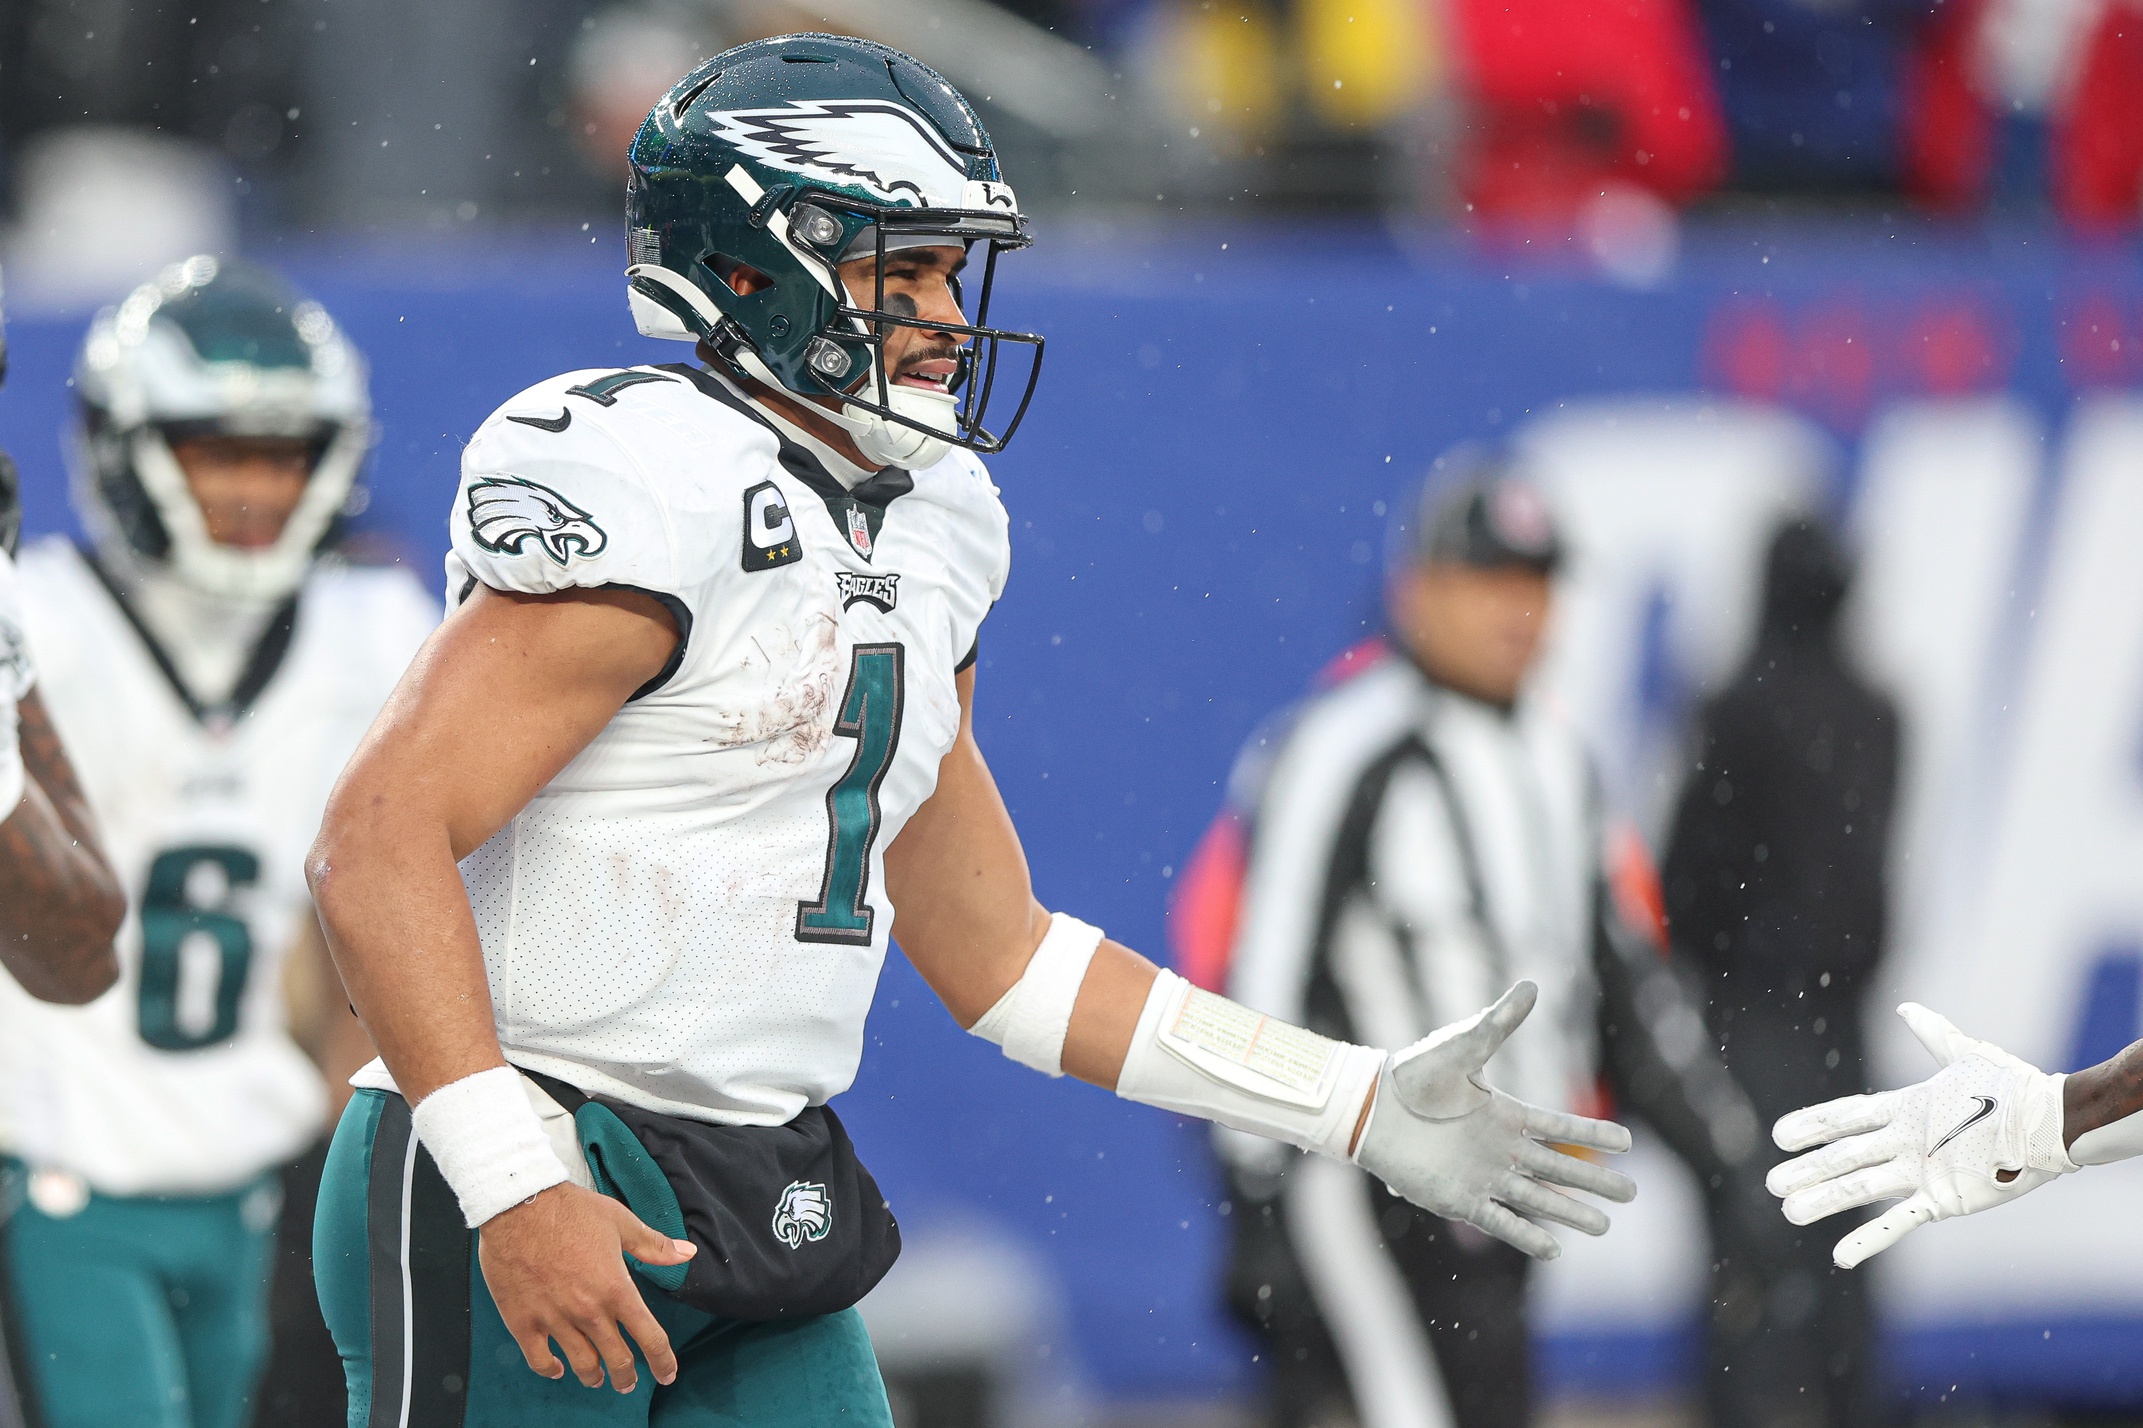 Jalen Hurts' performance for the Philadelphia Eagles is worth talking about